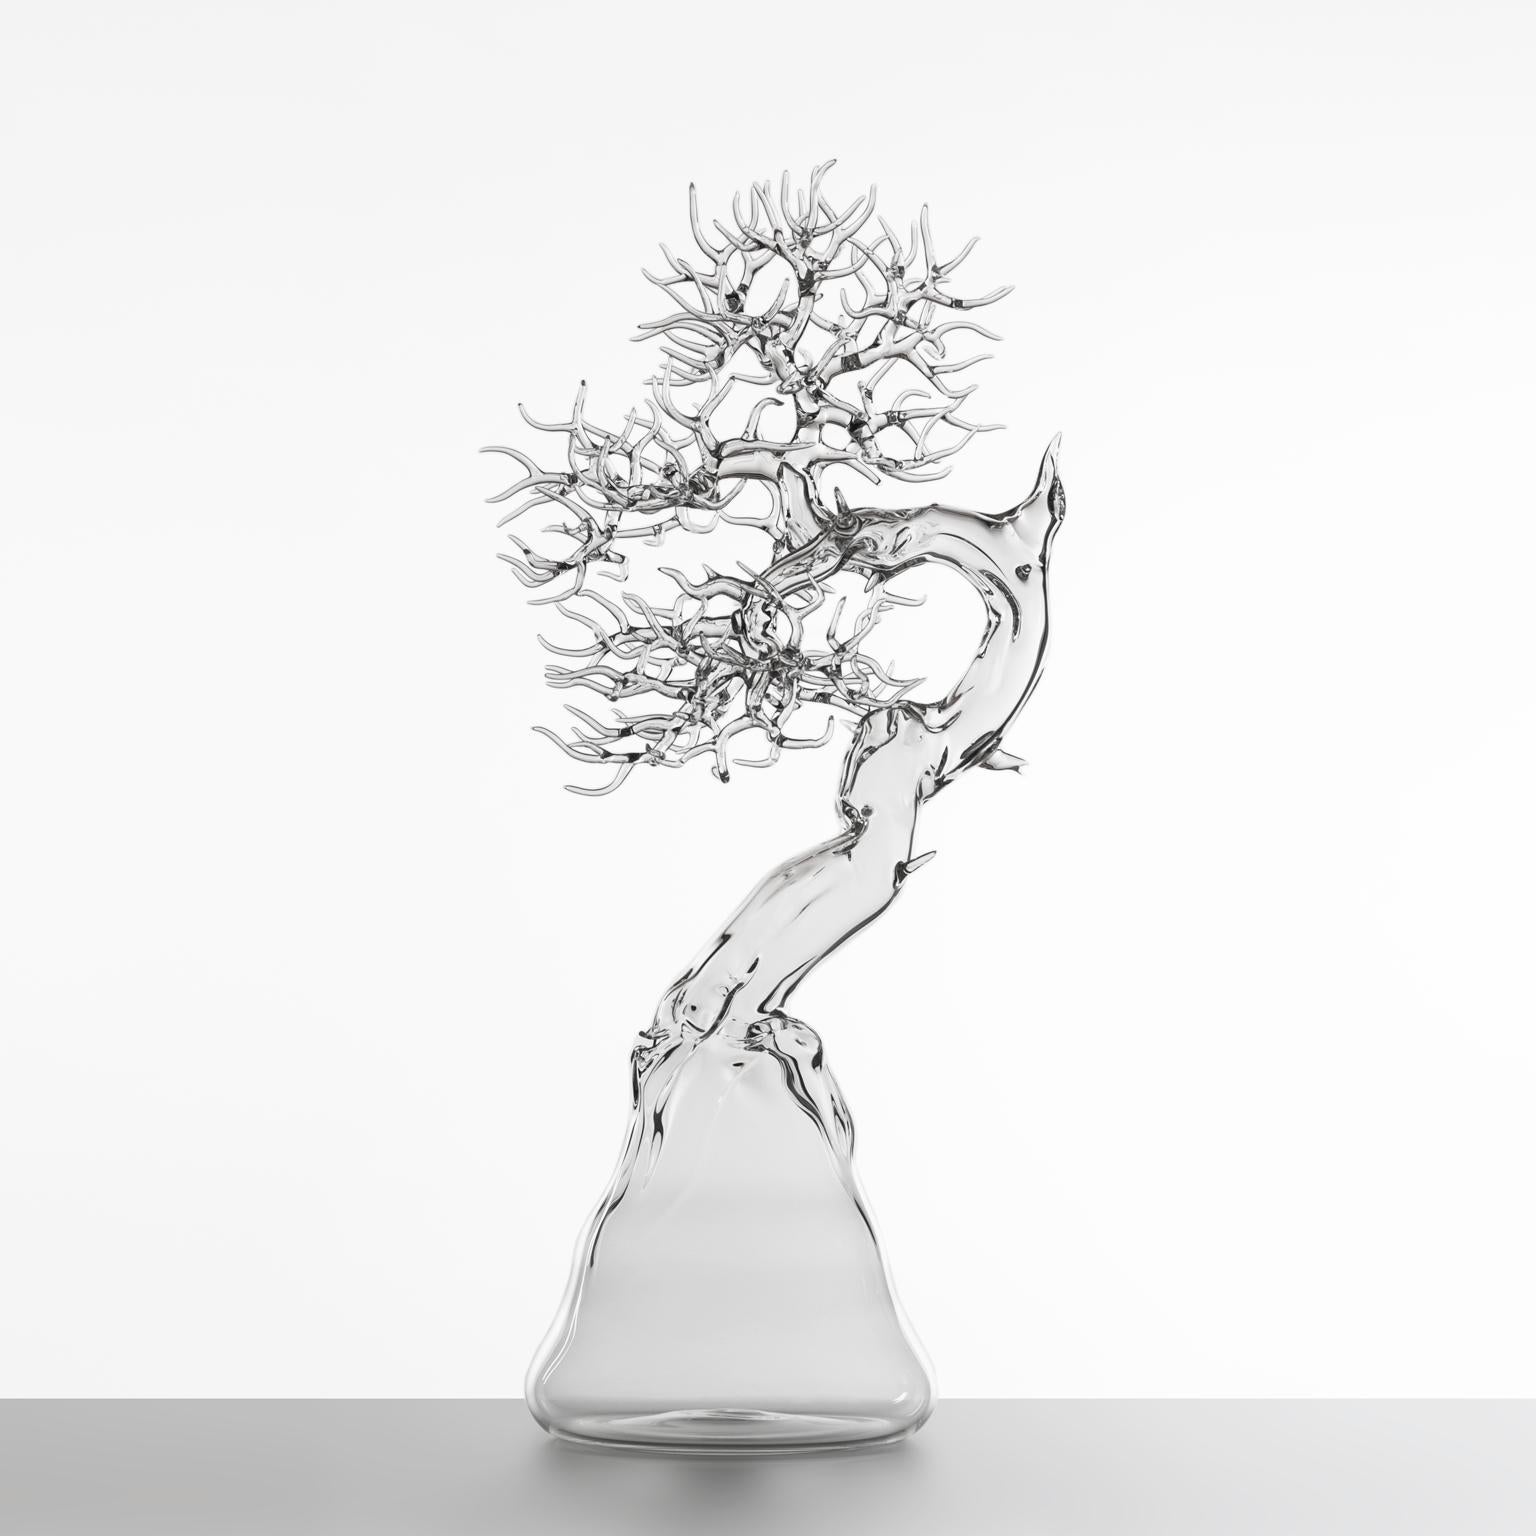 Hand-blown glass sculpture representing a bonsai tree.

Artist: Simone Crestani
Material: Borosilicate glass
Technique: Flameworking
Unique piece
Year: 2021
Measures: Height 26.77'', width 11.81'', depth 11.81'' in
Signed and dated on the